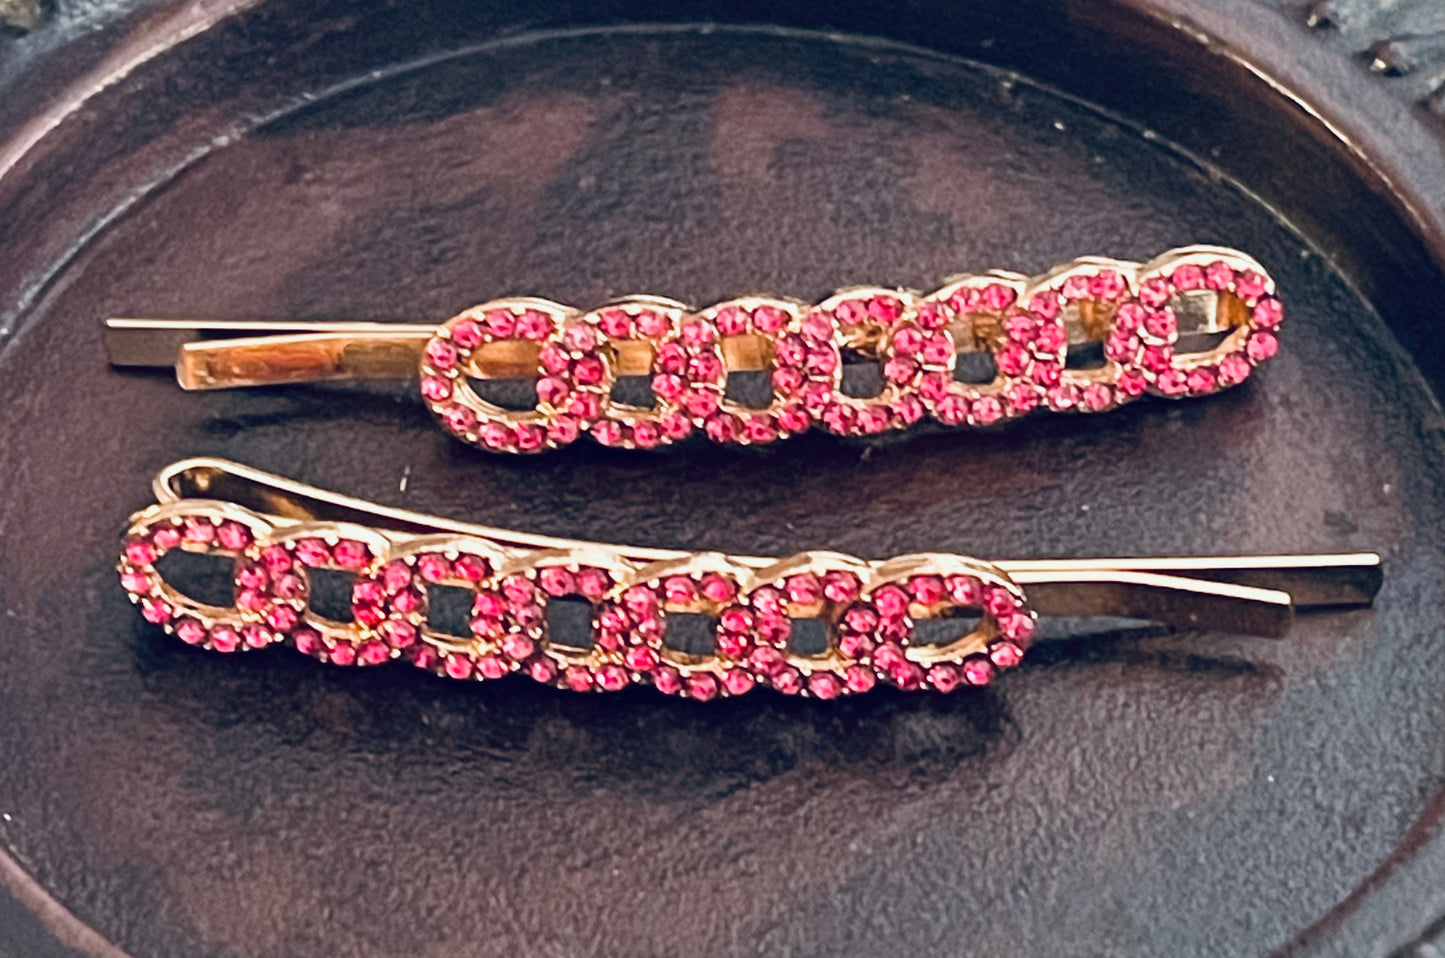 Pink Crystal rhinestone hairpins 2pc approximately 2.5”gold tone  formal hair accessories gift wedding bridesmaid princess accessory